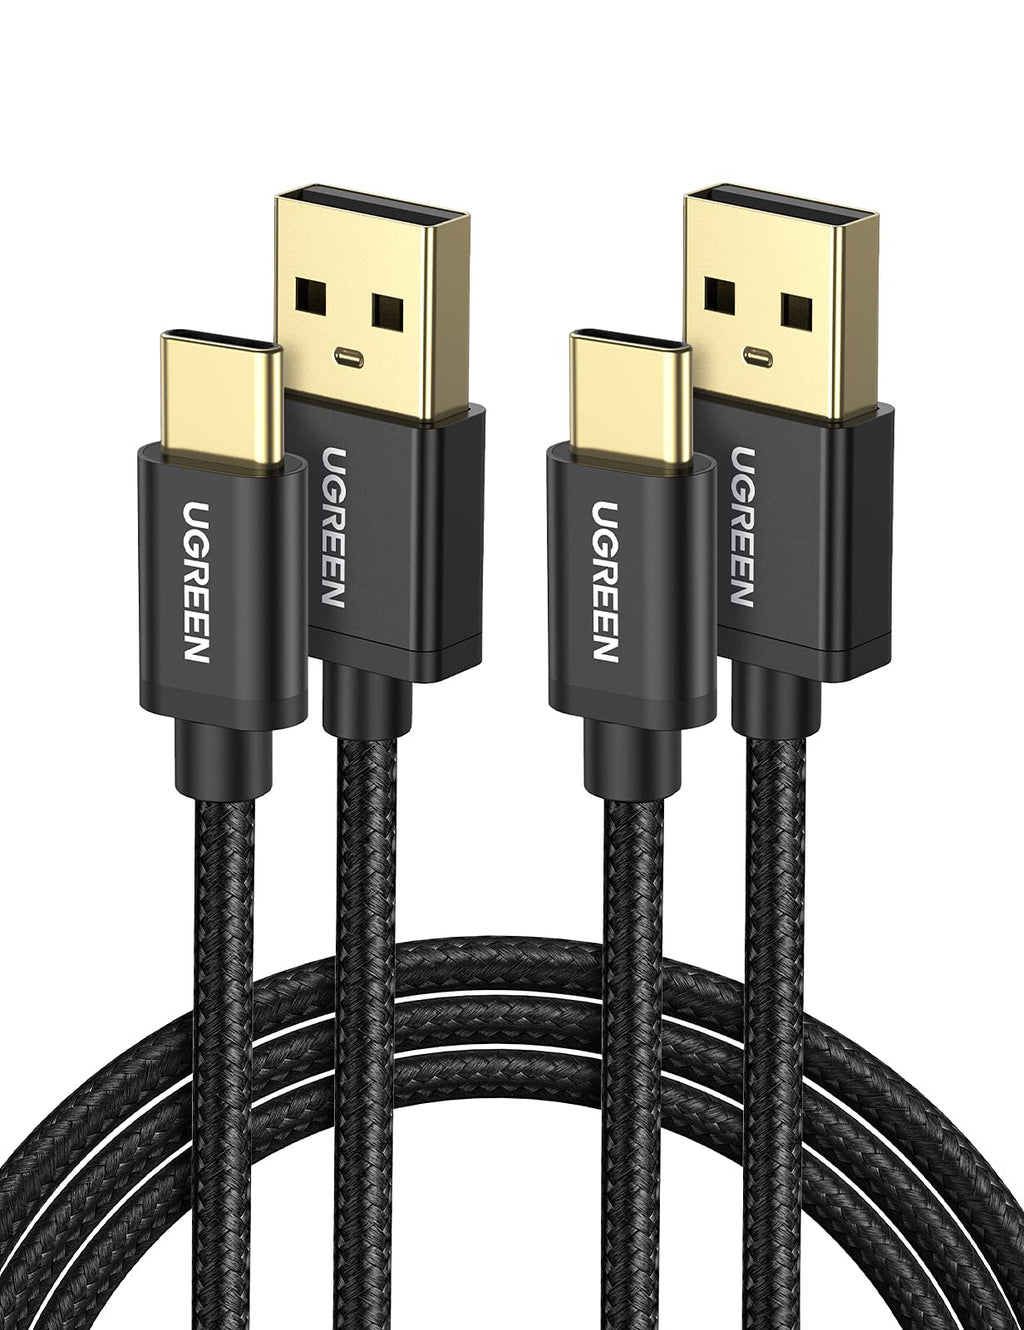 UGREEN USB C Cable 2 Pack 3A Fast Charge - 6FT QC3.0 Durable Nylon Braided USB A to USB C Charger Cable Compatible for Samsung Galaxy S21 S20 Z Flip 3 Z Fold Note 20 LG V50 V40 Google Pixel Moto PS5